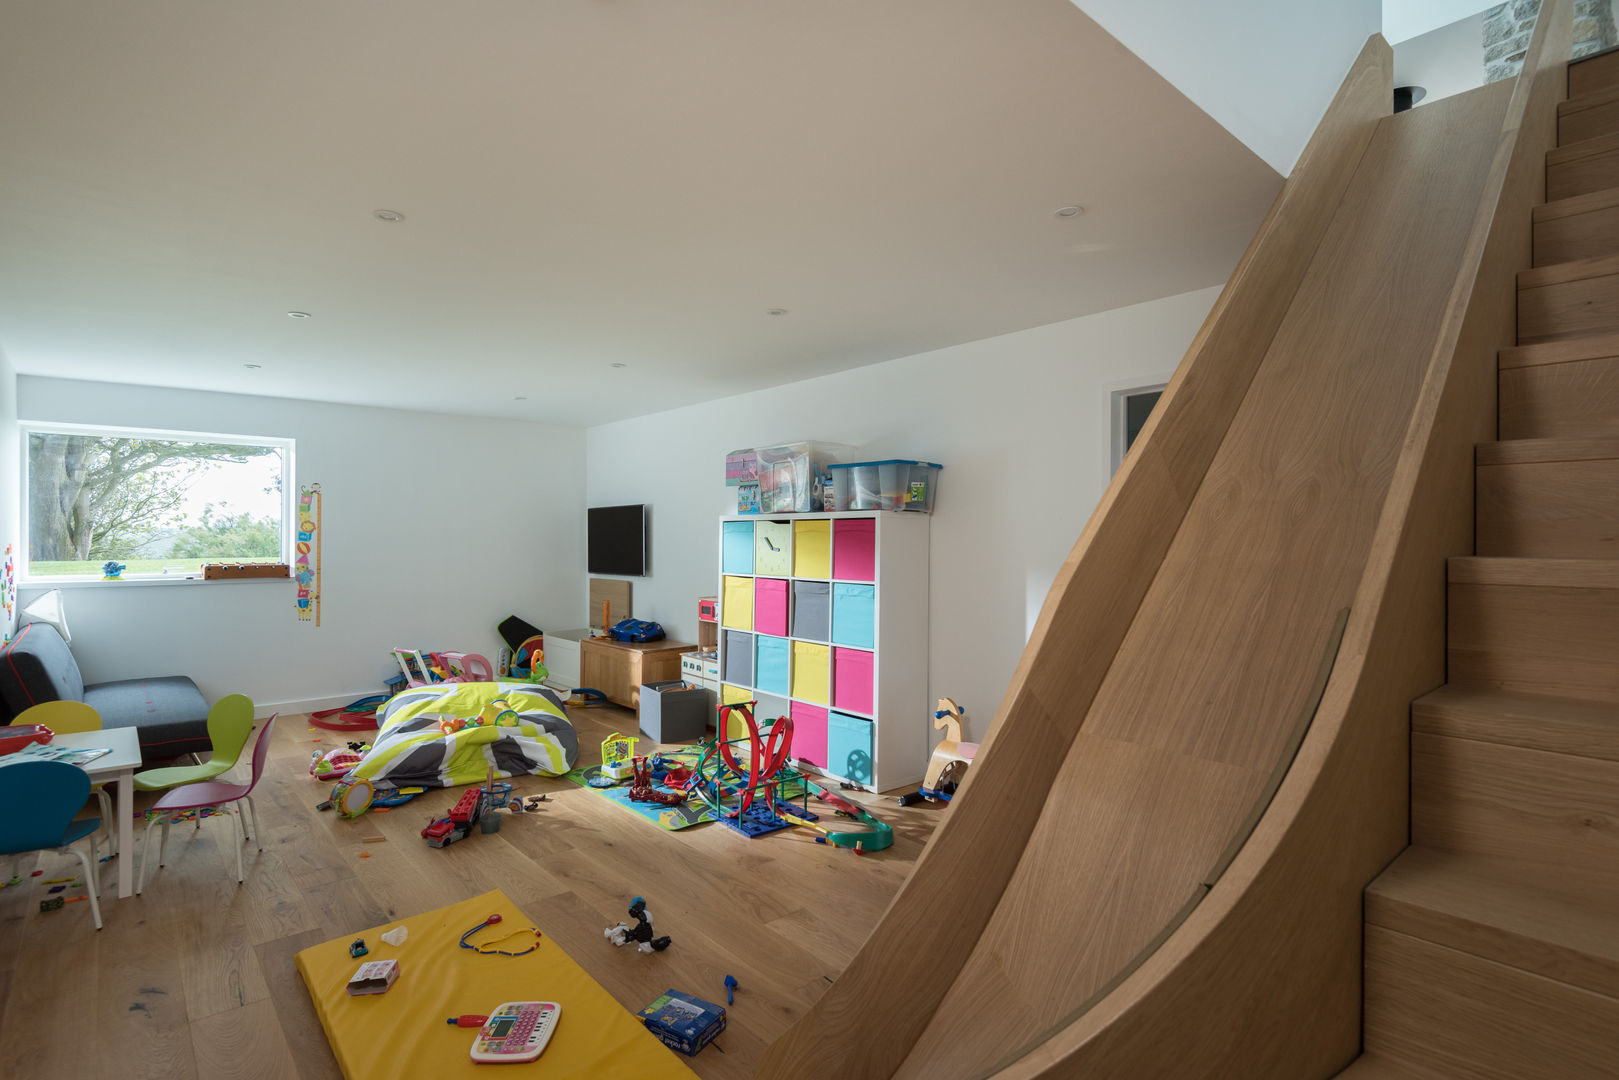 Contemporary Replacement Dwelling, Cubert, Laurence Associates Laurence Associates Nursery/kid’s room play room,game room,internal slide,fun,games,storage,children,toys,modular storage,bright colours,play,kids room